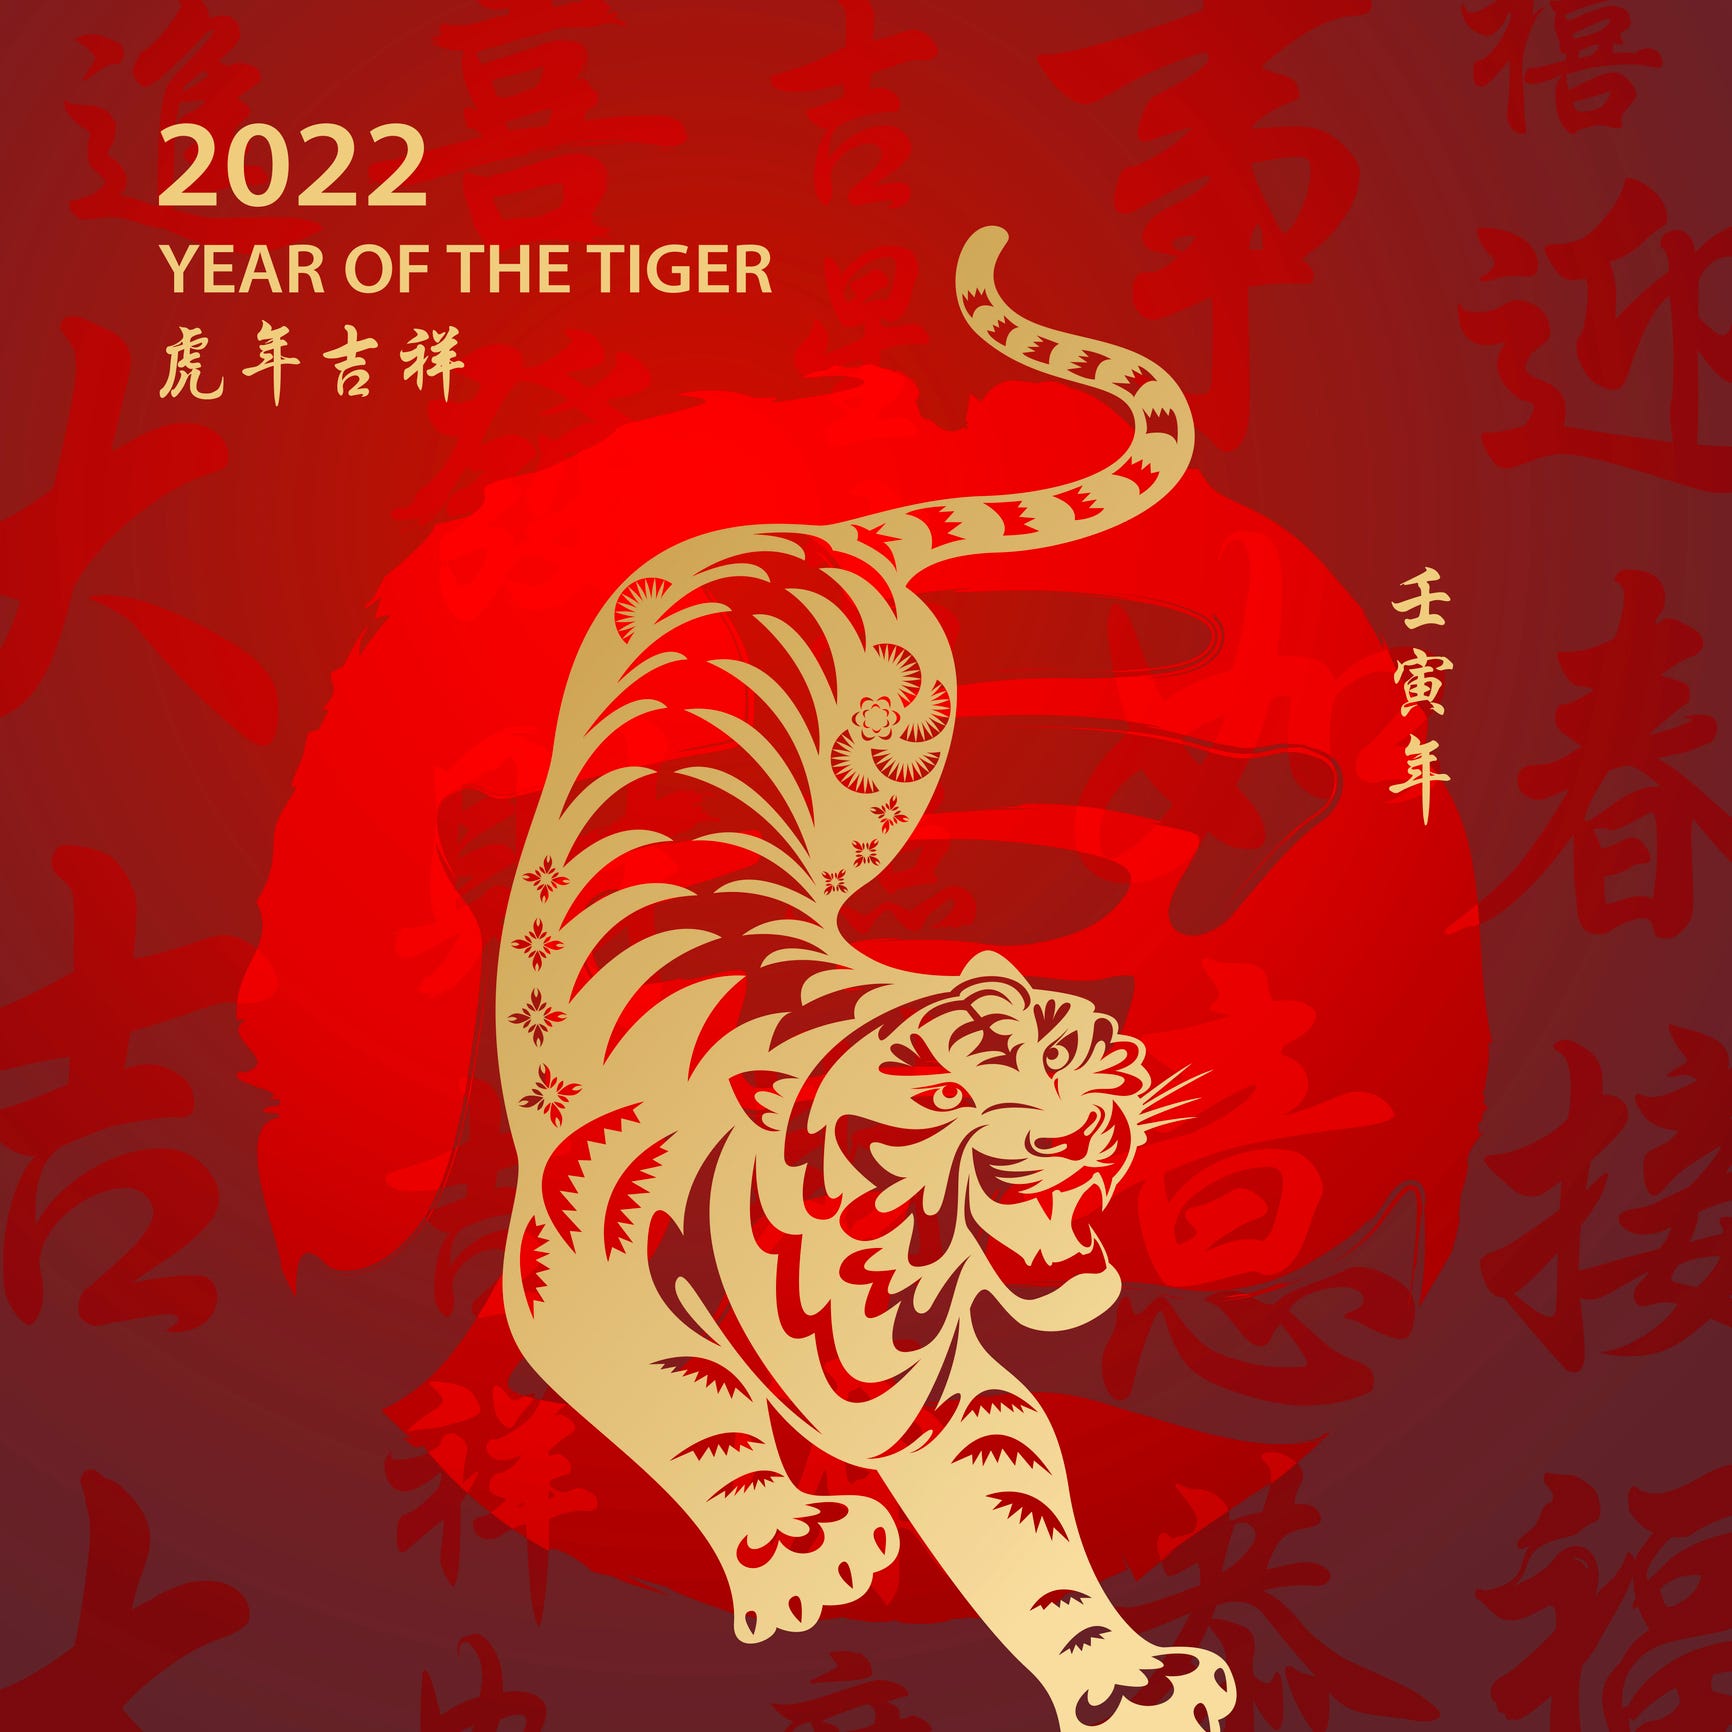 what chinese animal represents 2009